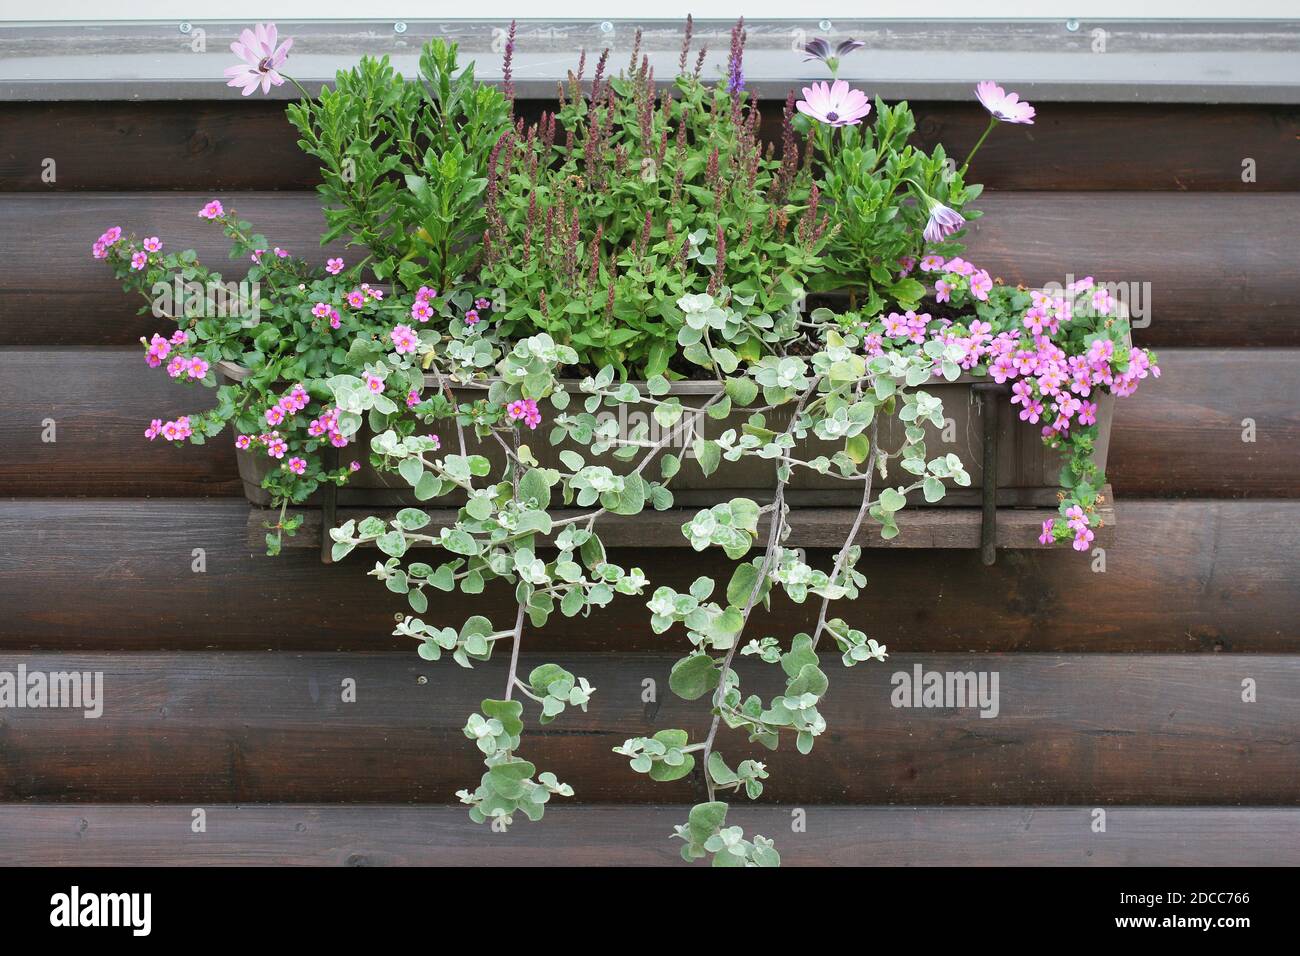 Pink and white flowering plants in a flower box in the window sill . Gerbera, and bacopa flower growth in pot Stock Photo